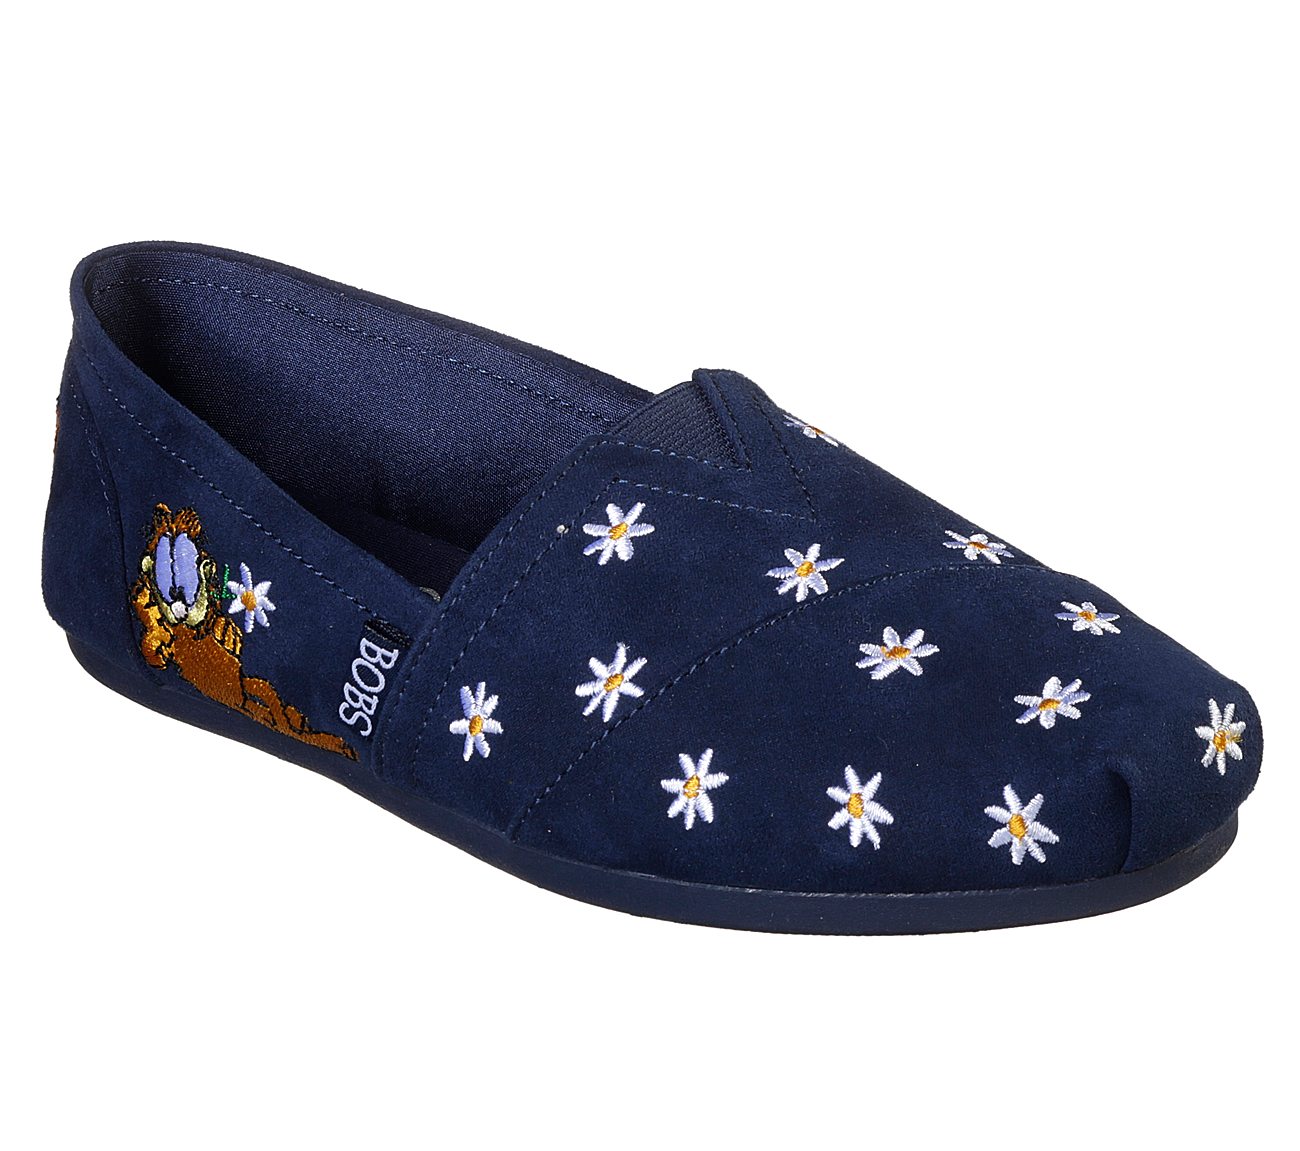 SKECHERS BOBS Plush - Daisy Days BOBS Shoes